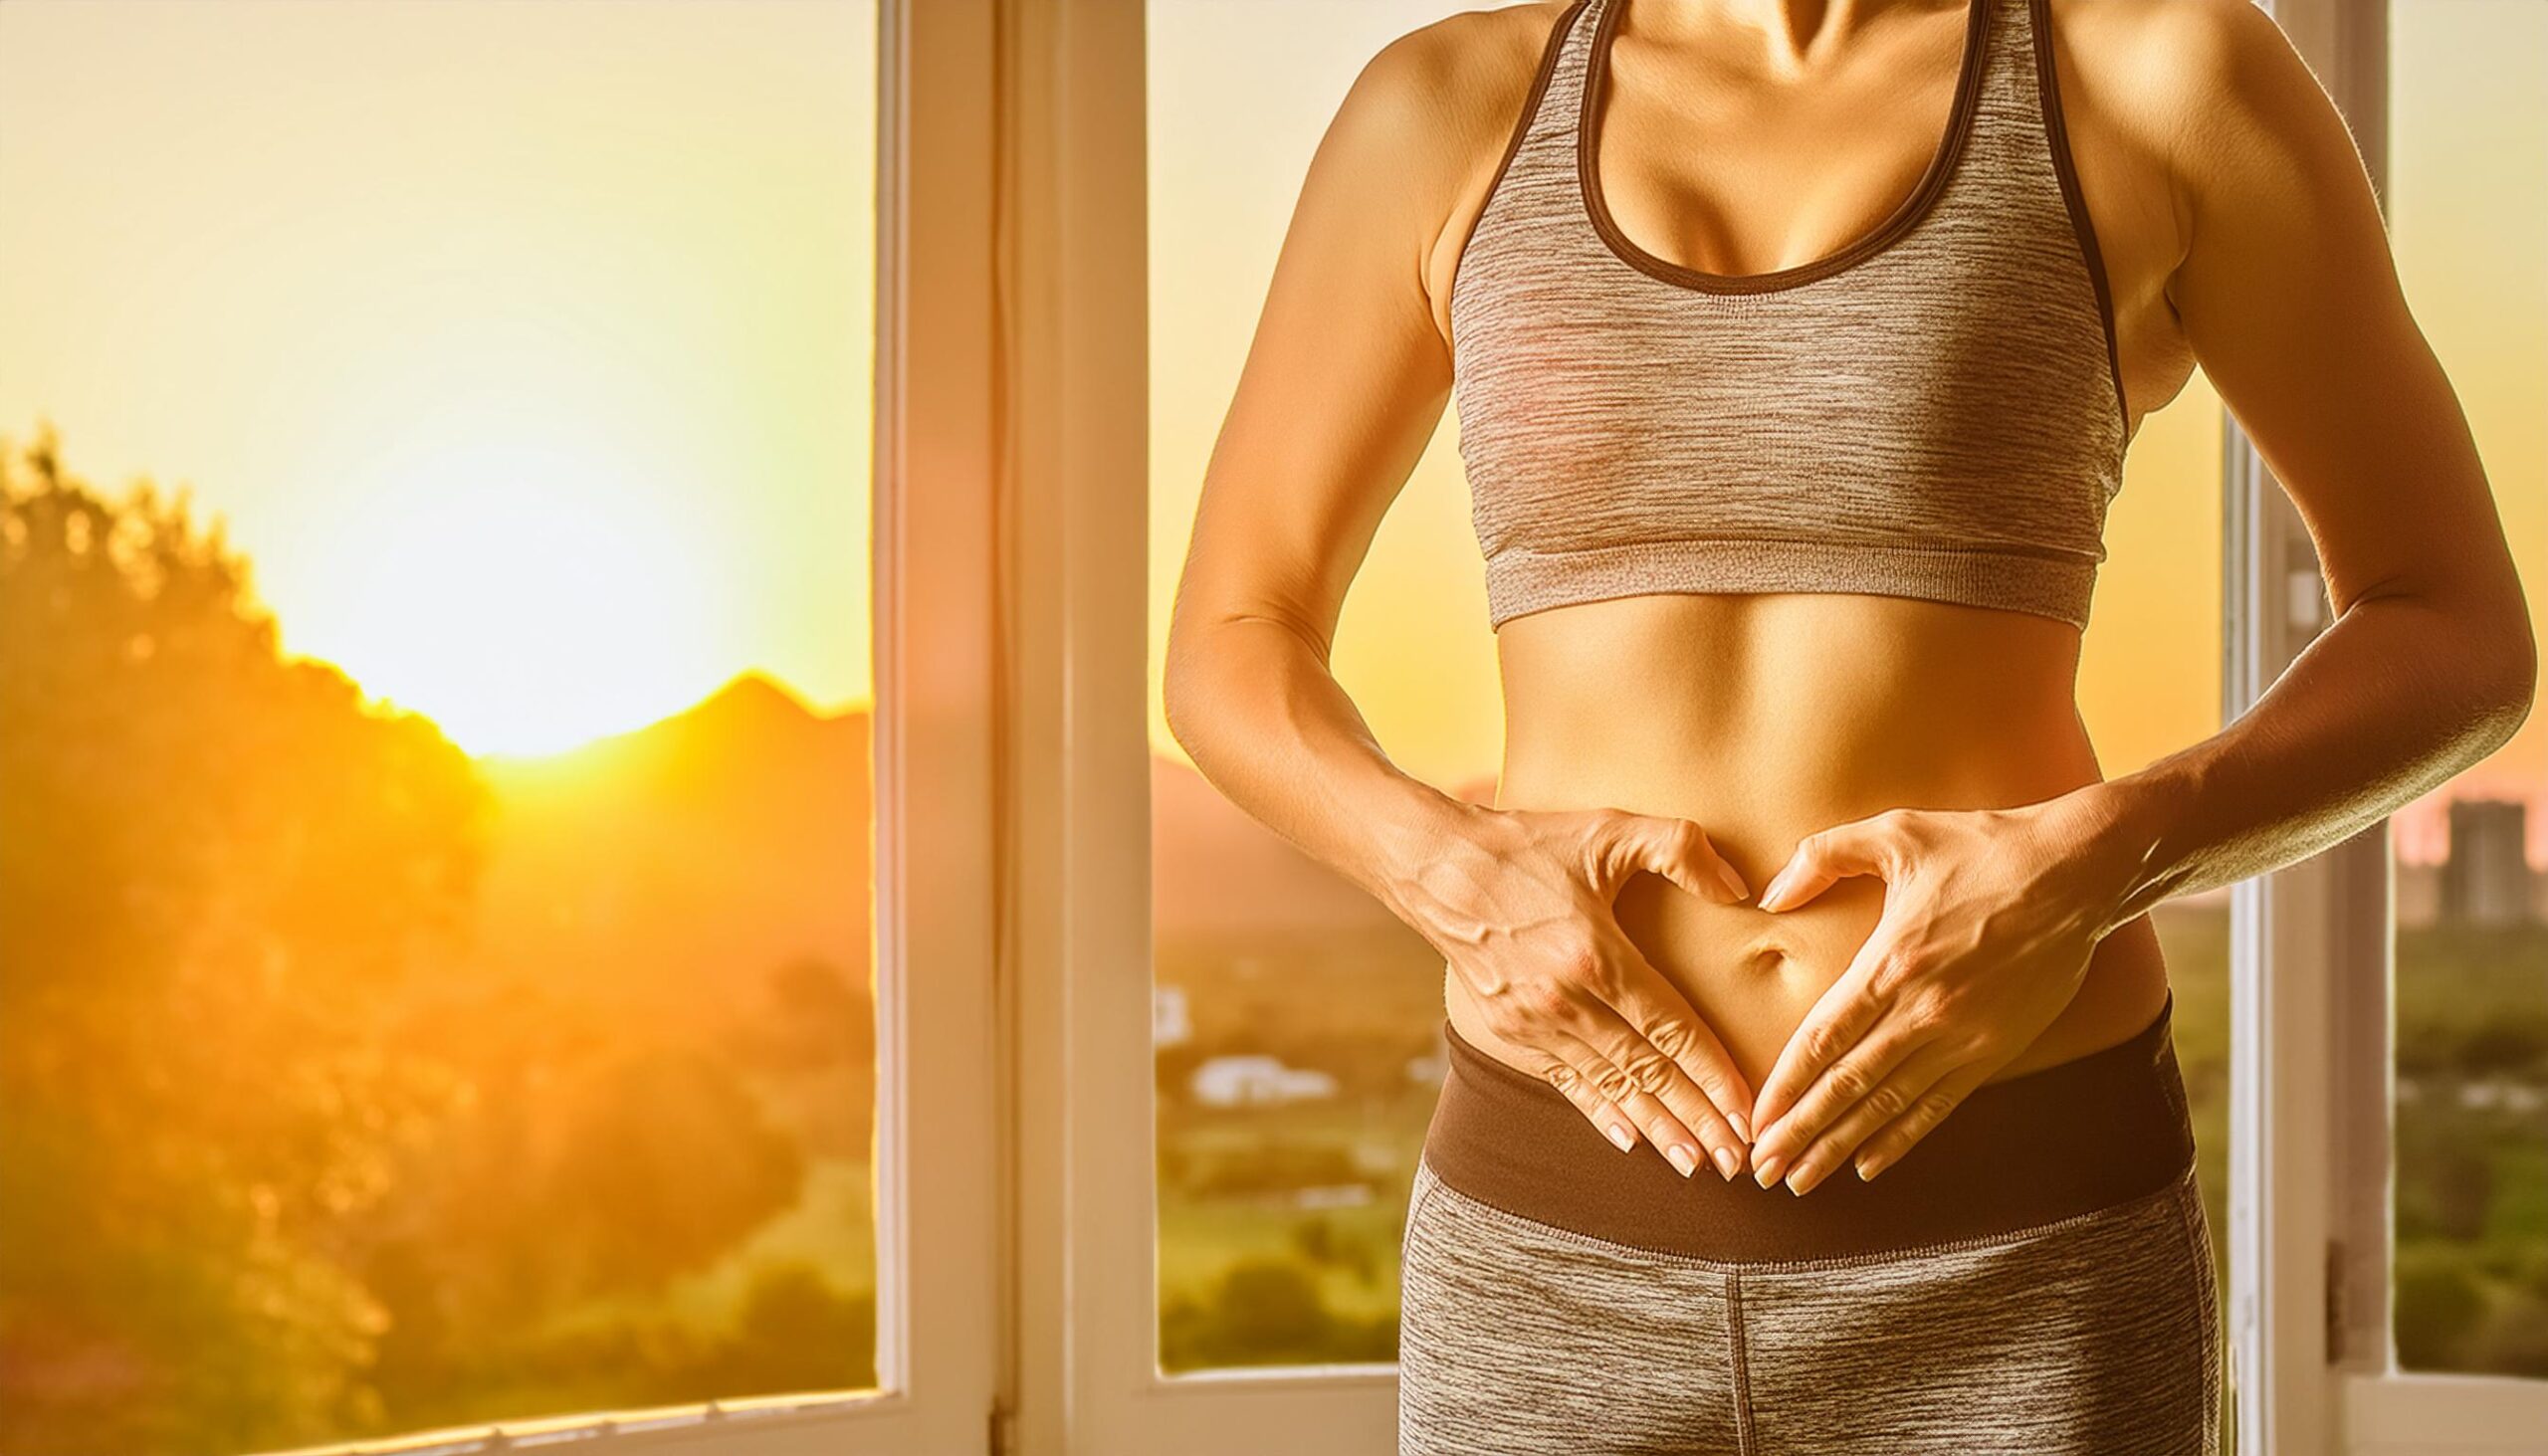 Gut Health picture, with a women with gym suite showing heart shape in her stomach